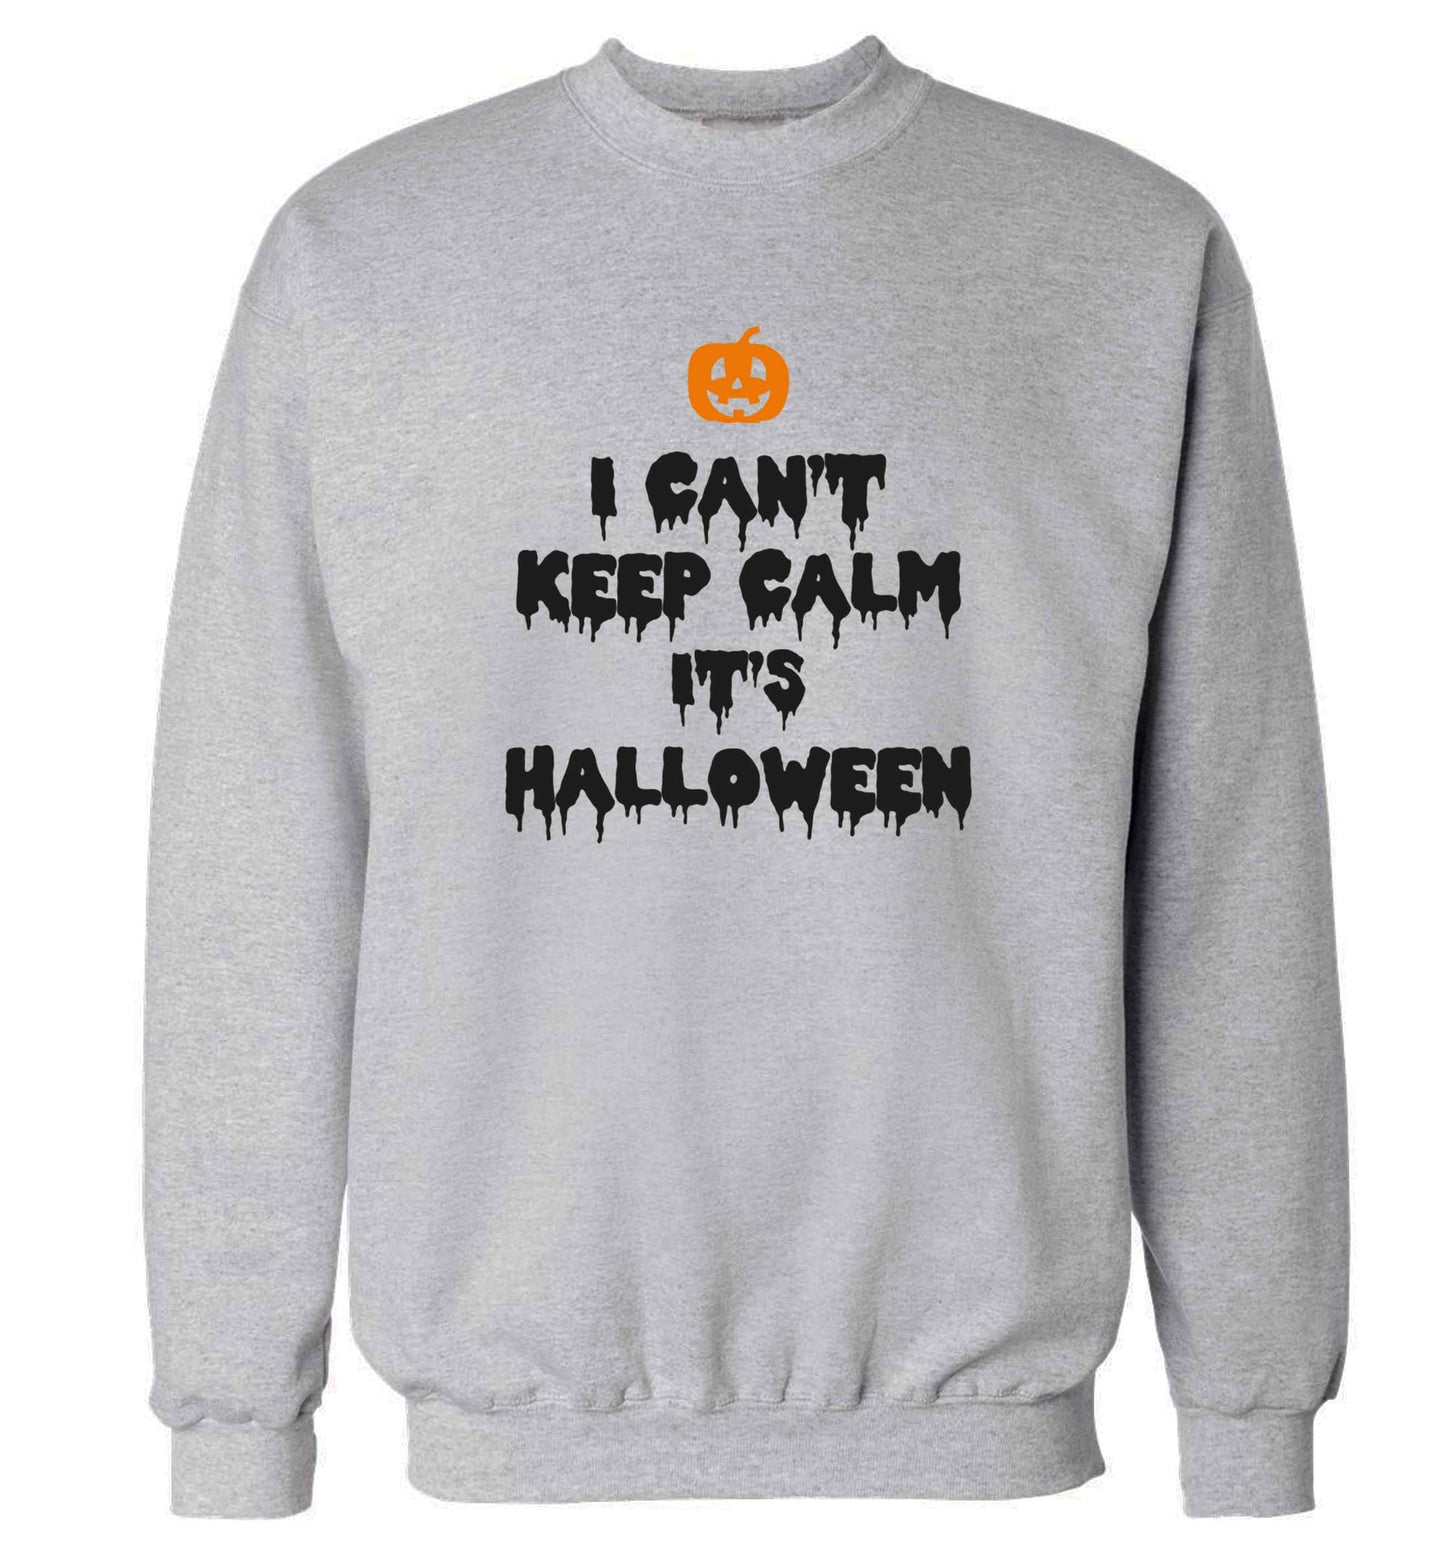 I can't keep calm it's halloween adult's unisex grey sweater 2XL